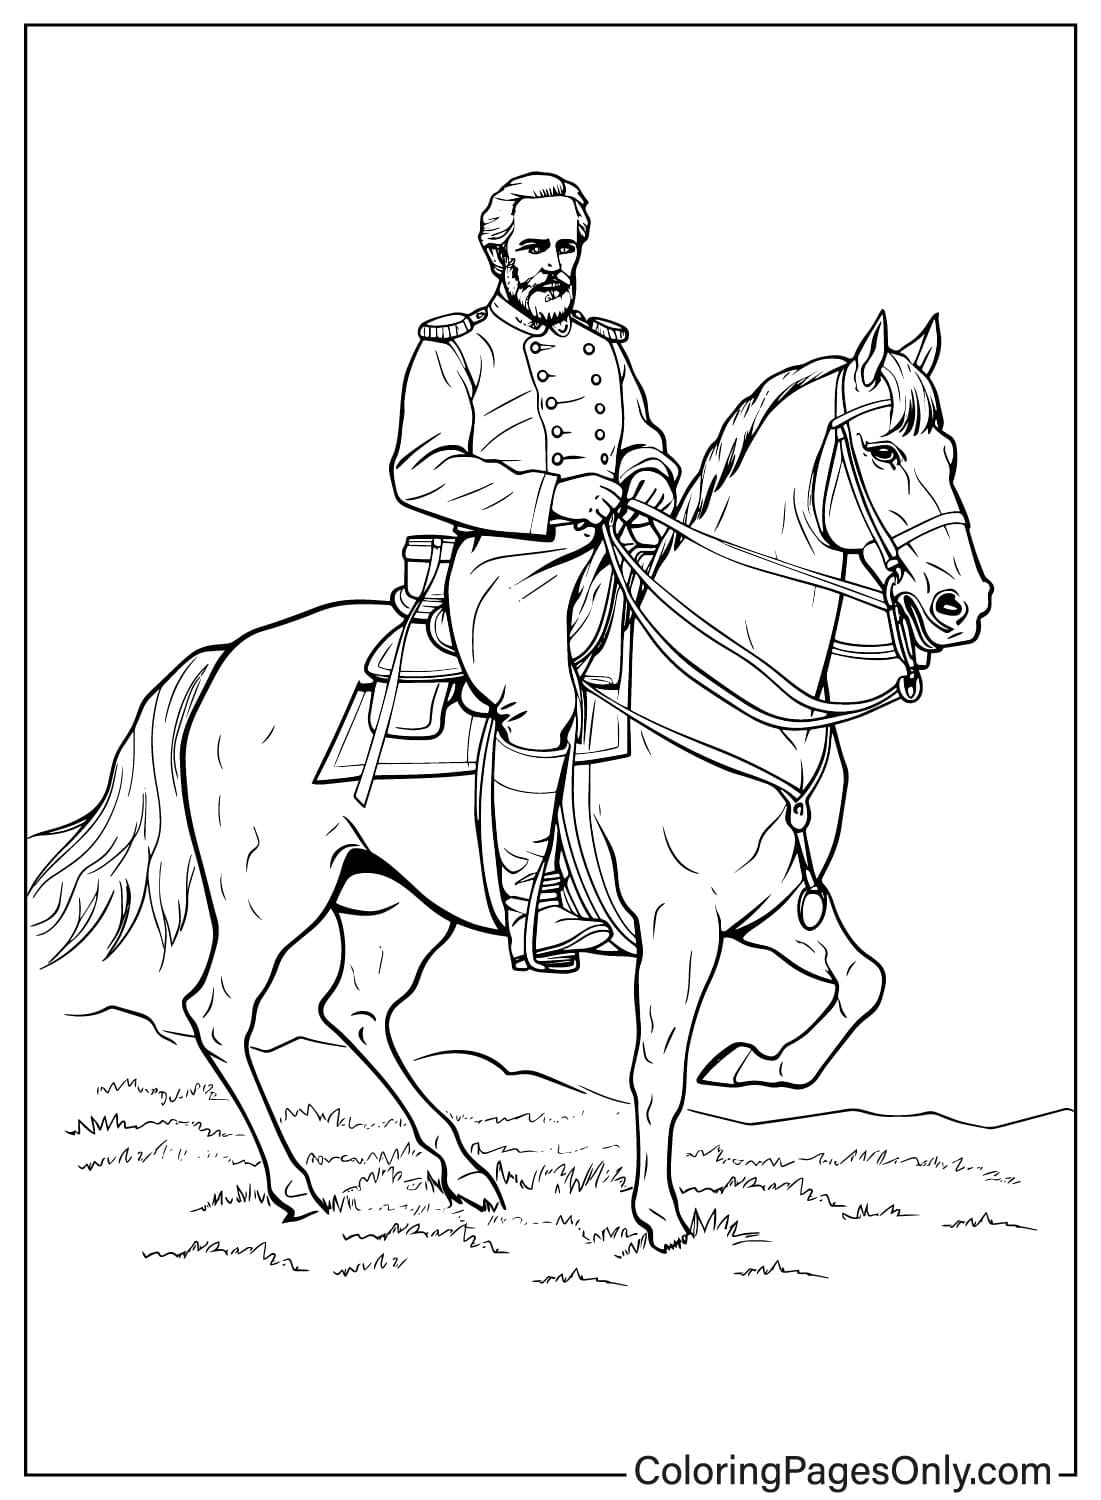 Robert E. Lee Coloring Page Printable from Robert E. Lee